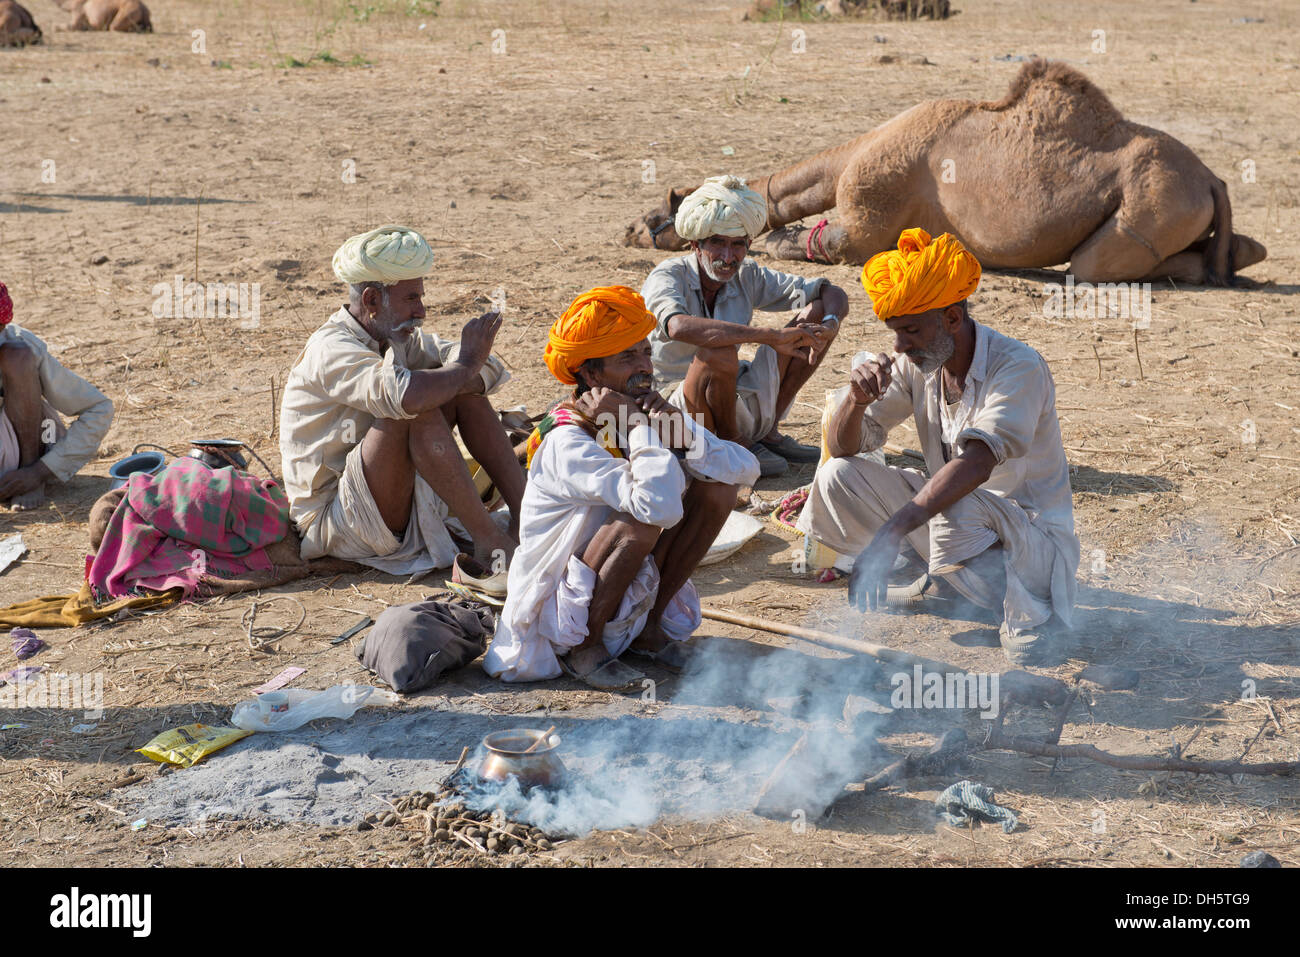 Four elderly Indian men with turbans and wearing the traditional Dhoti garment squatting on the ground, food is being prepared Stock Photo